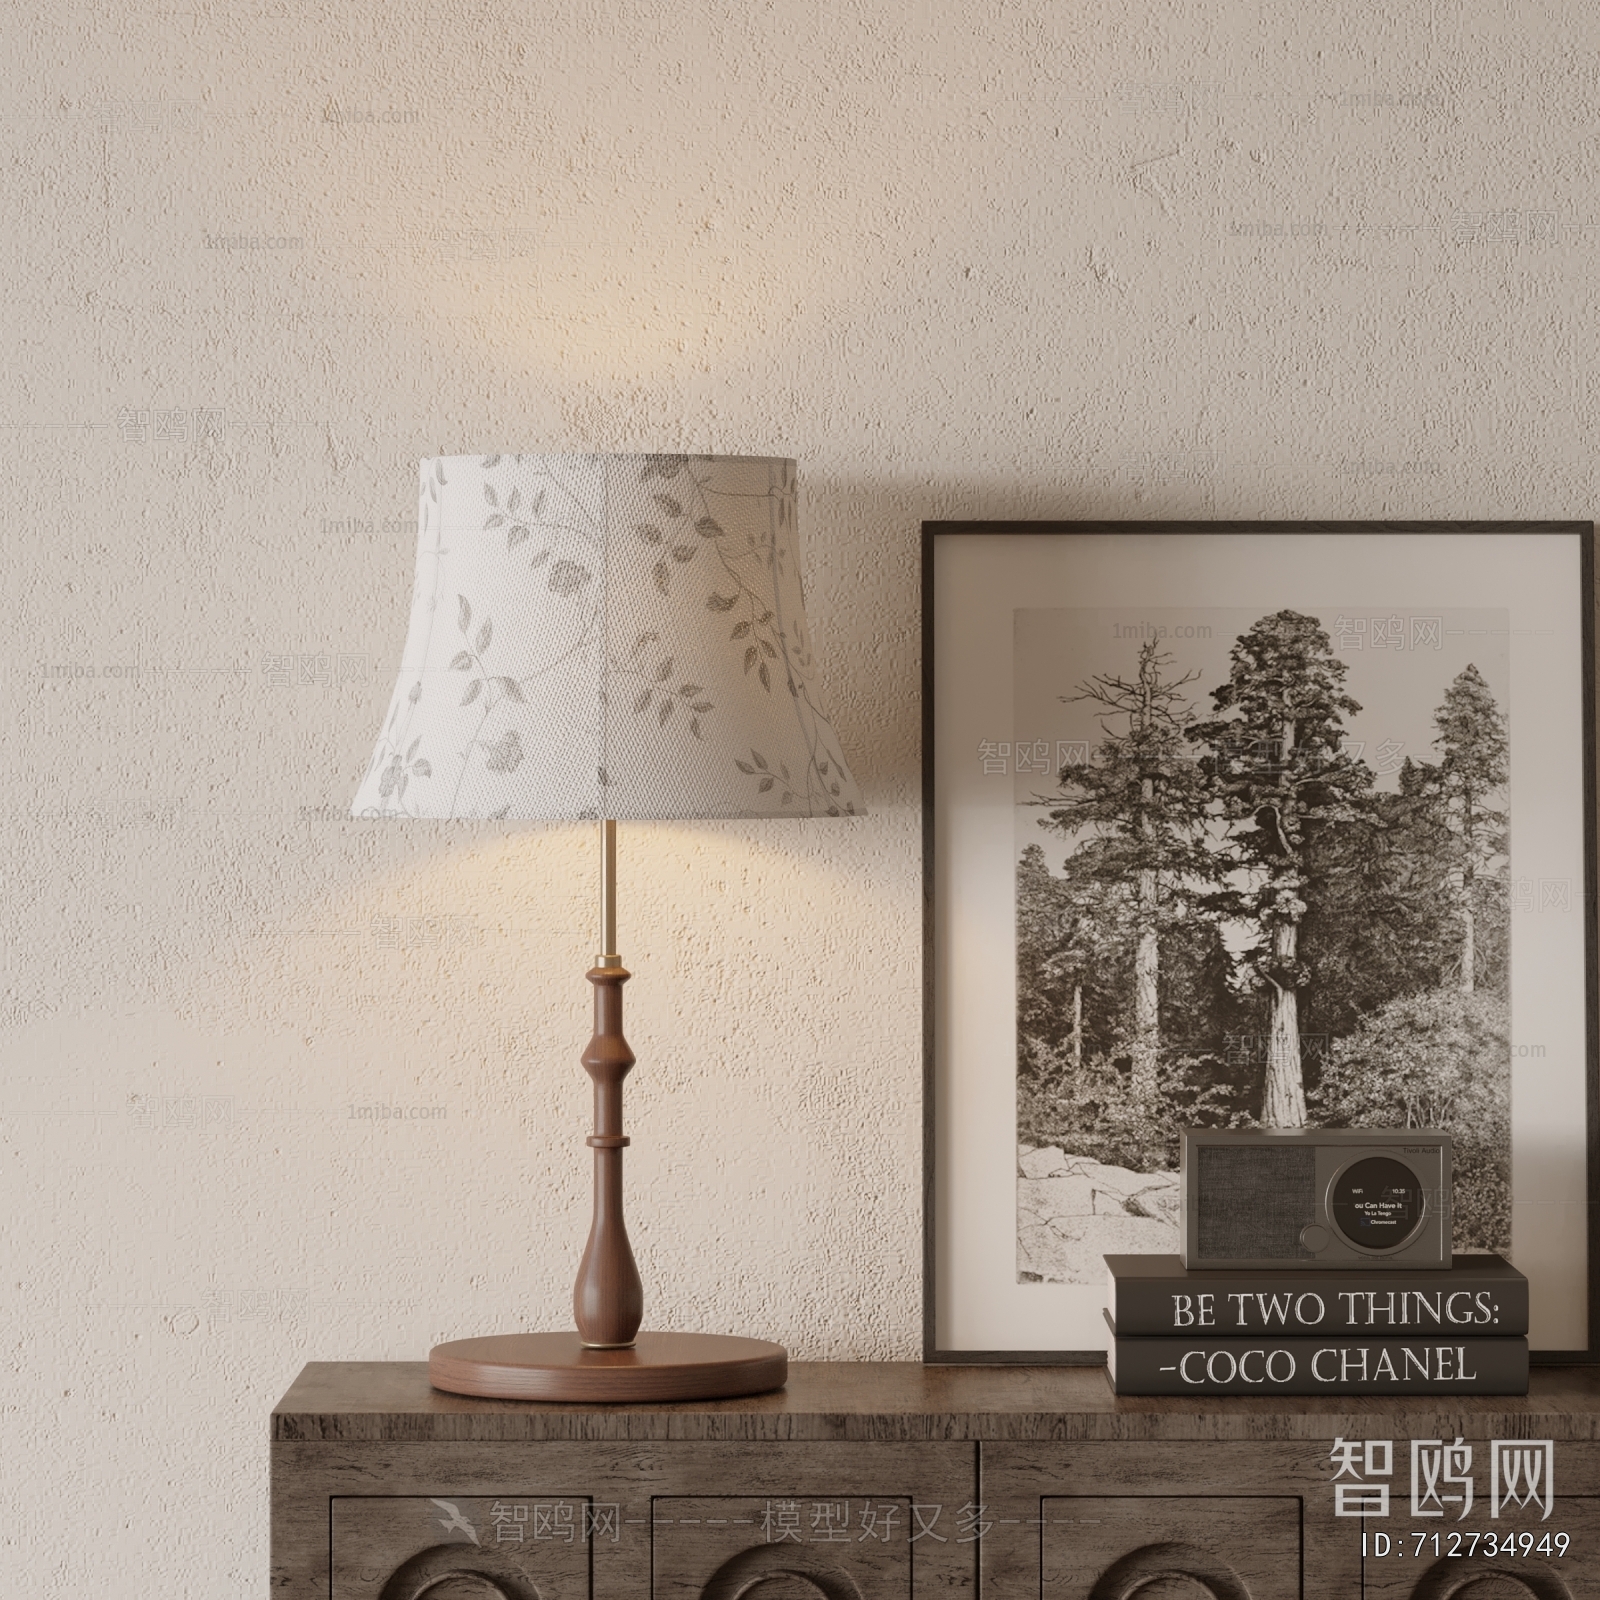 French Style Table Lamp